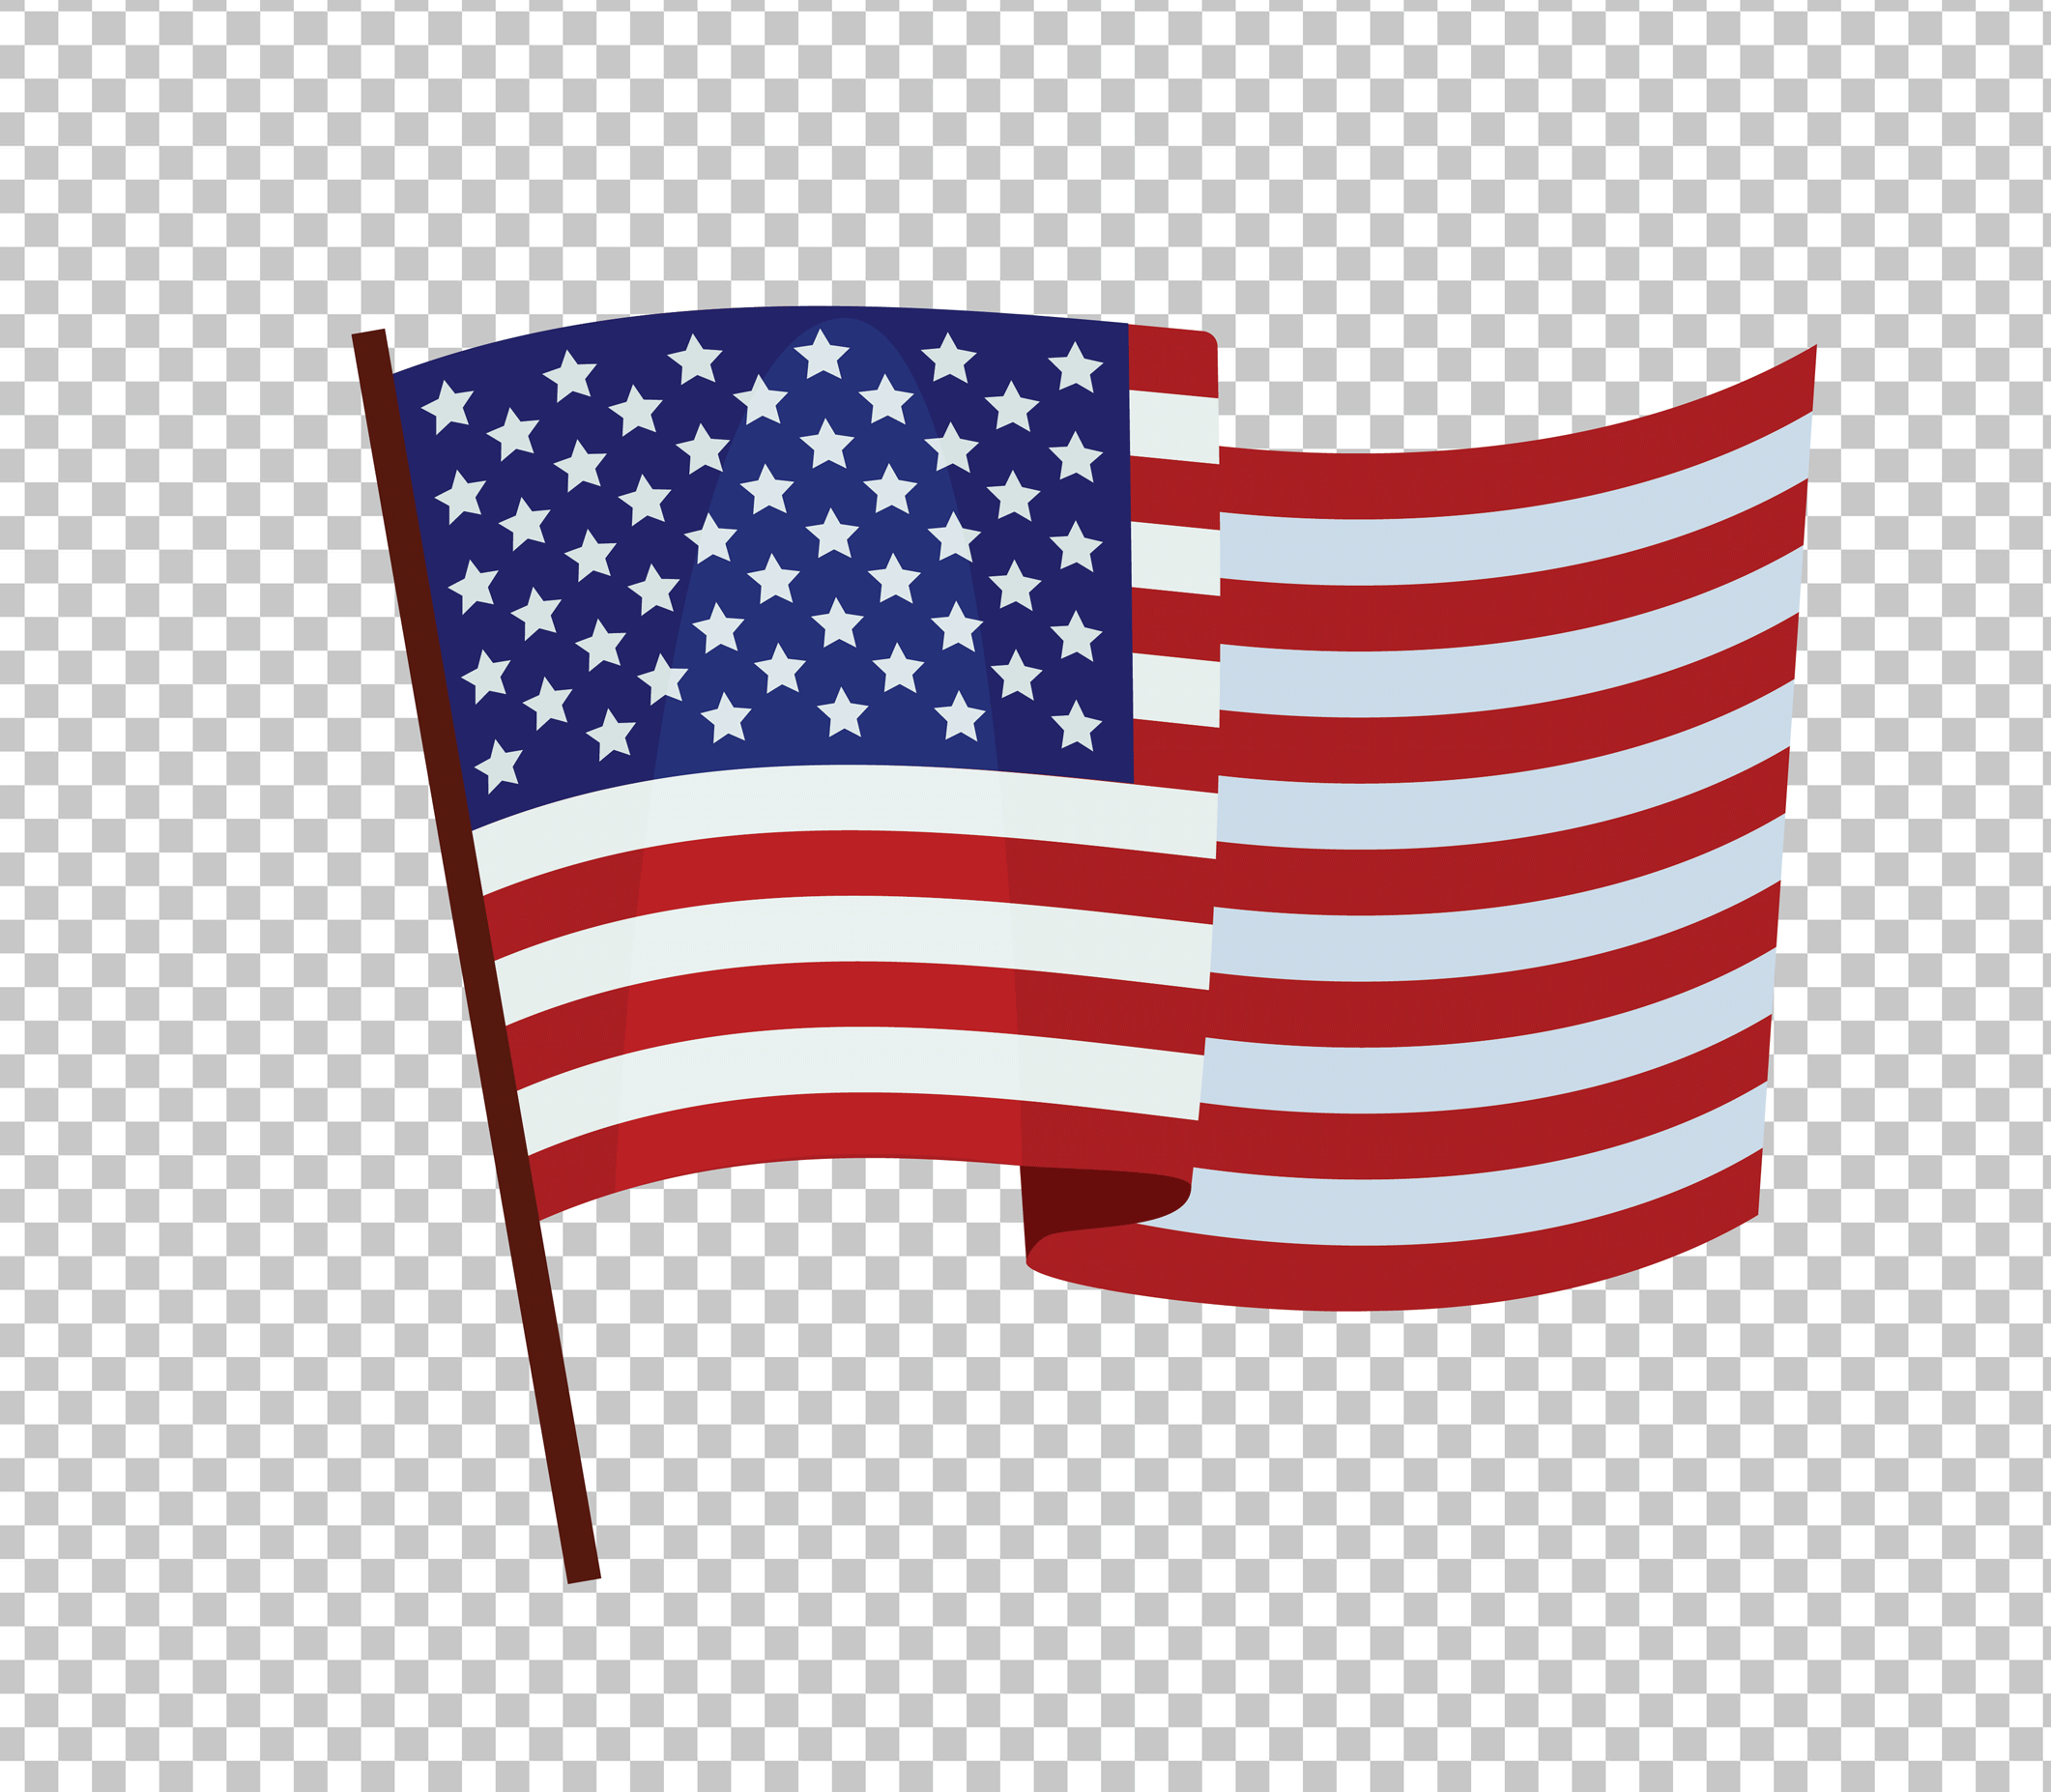 American or USA flag waving in the wind on transparent background